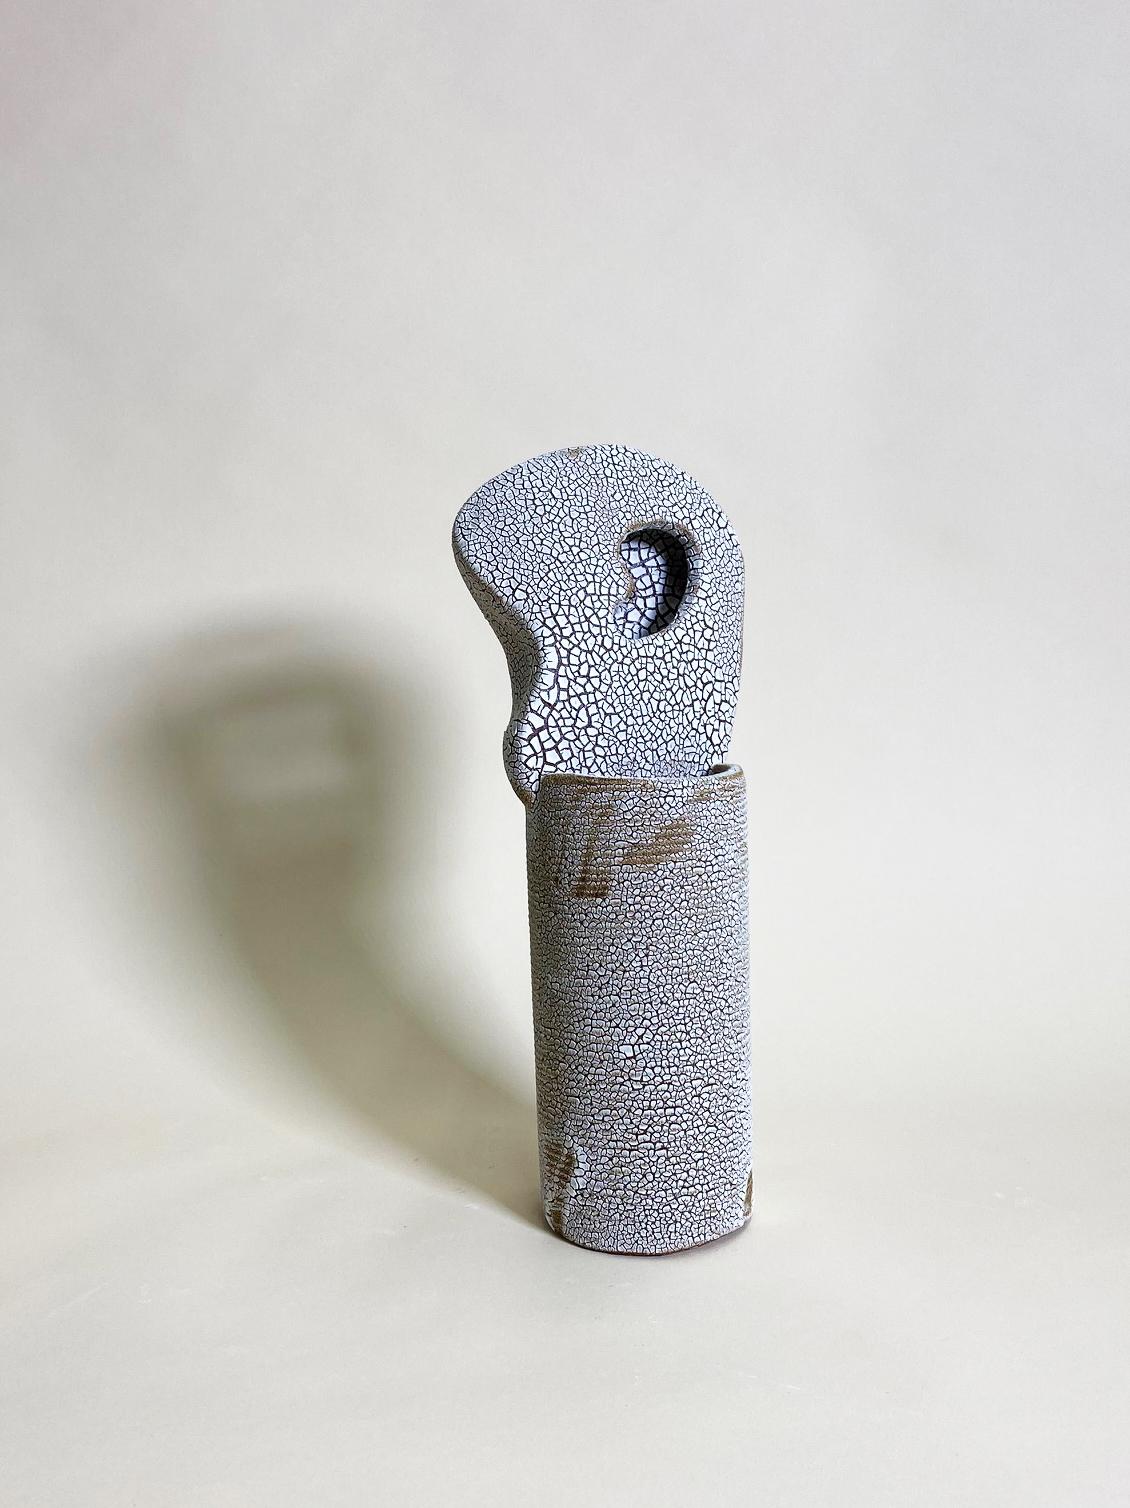 Small tempo sculpture by Olivia Cognet
Materials: Ceramic
Dimensions: around 20-35 cm tall

Available in different sizes, sets available.

Tempo
Dynamic sculptures decorated with textured, subtly imperfect disks, in which repetition echoes